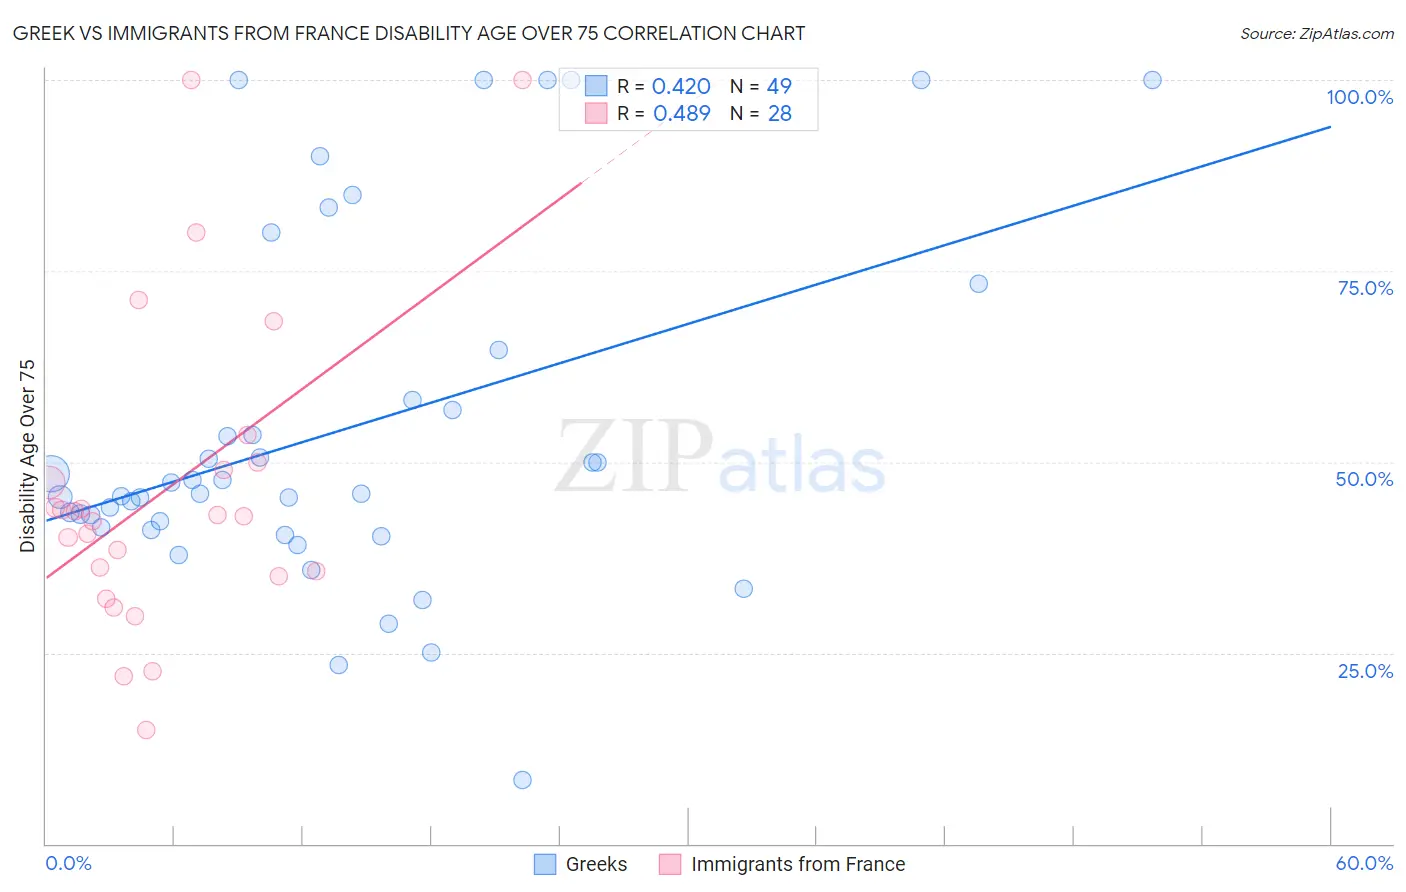 Greek vs Immigrants from France Disability Age Over 75